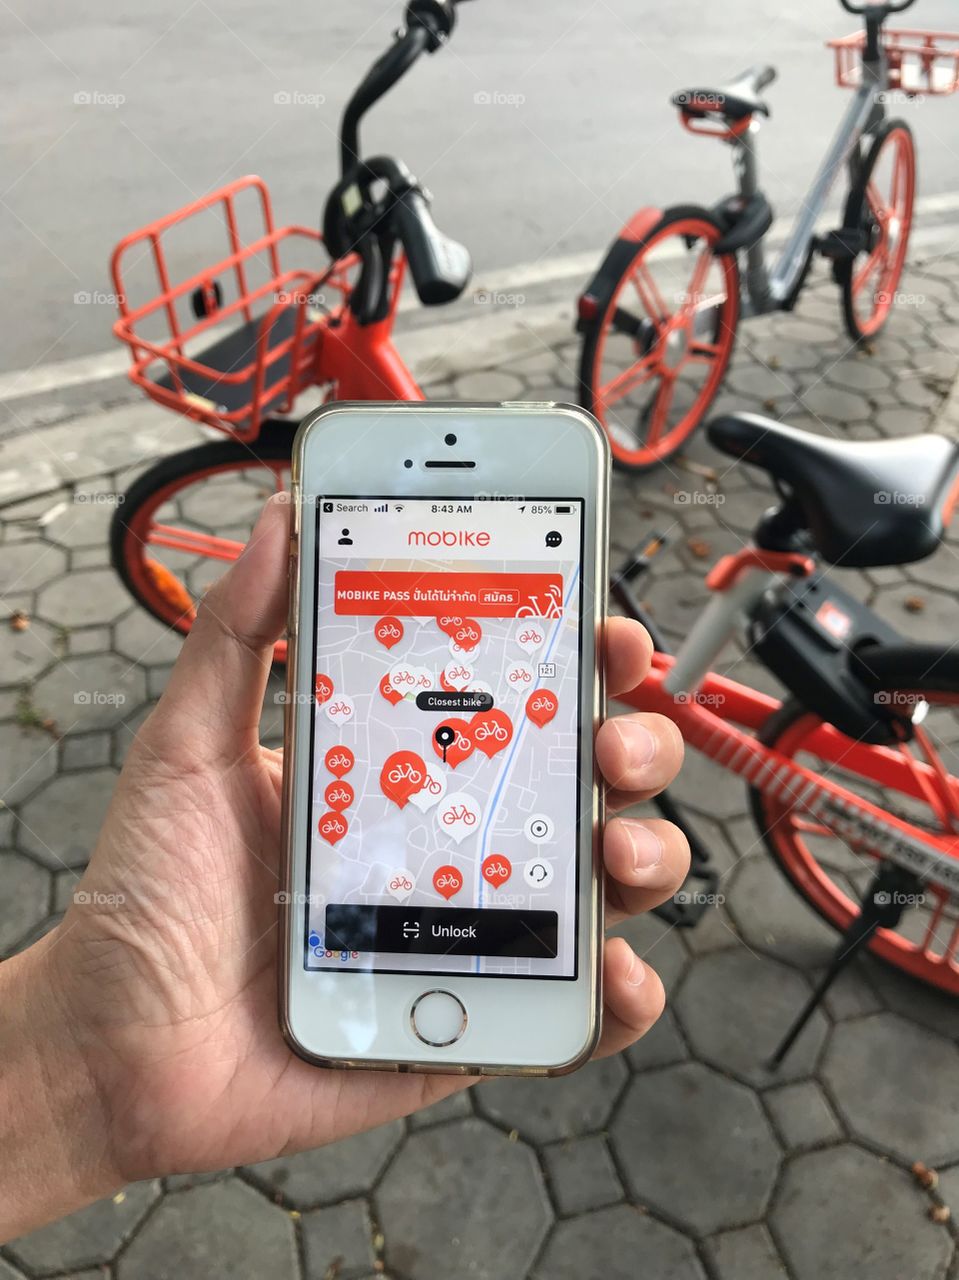 using application on iPhone for “mobike” rental bicycle which parks on footpath at public park, Chiang Mai, Thailand